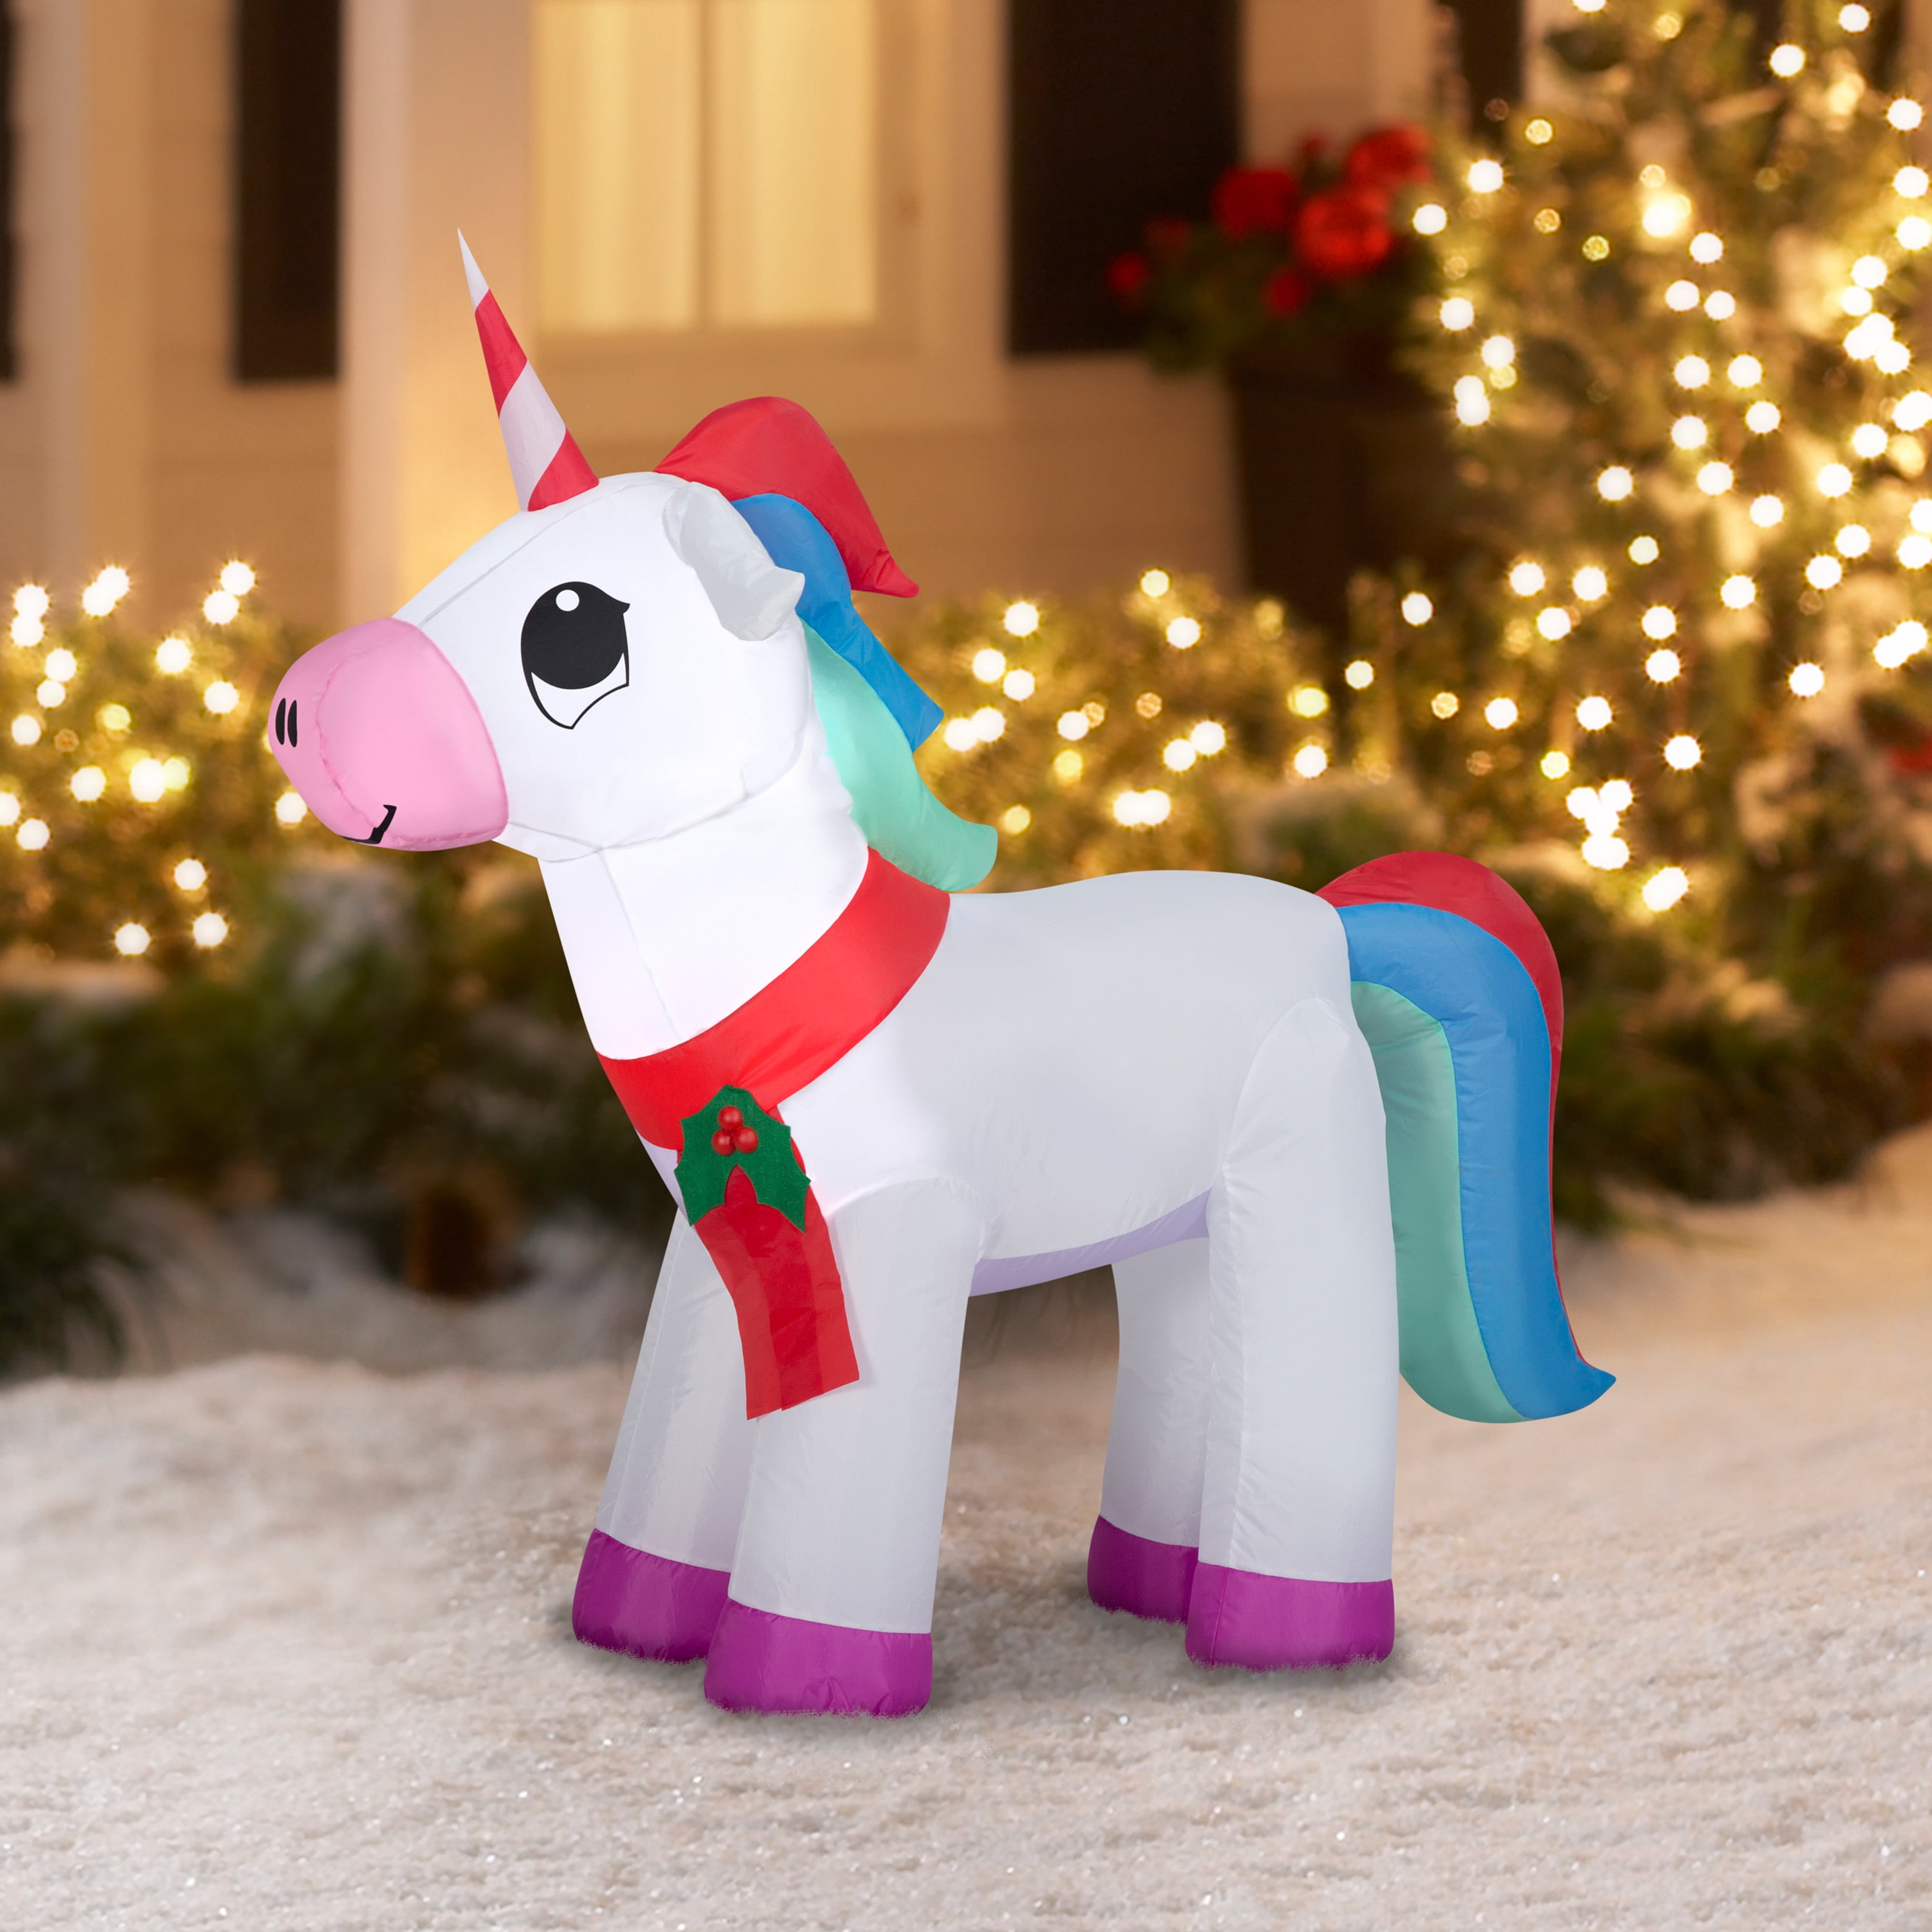 Tall Inflatable Outdoor Lawn Yard Display Christmas Decorations Unicorn 3.5 ft 